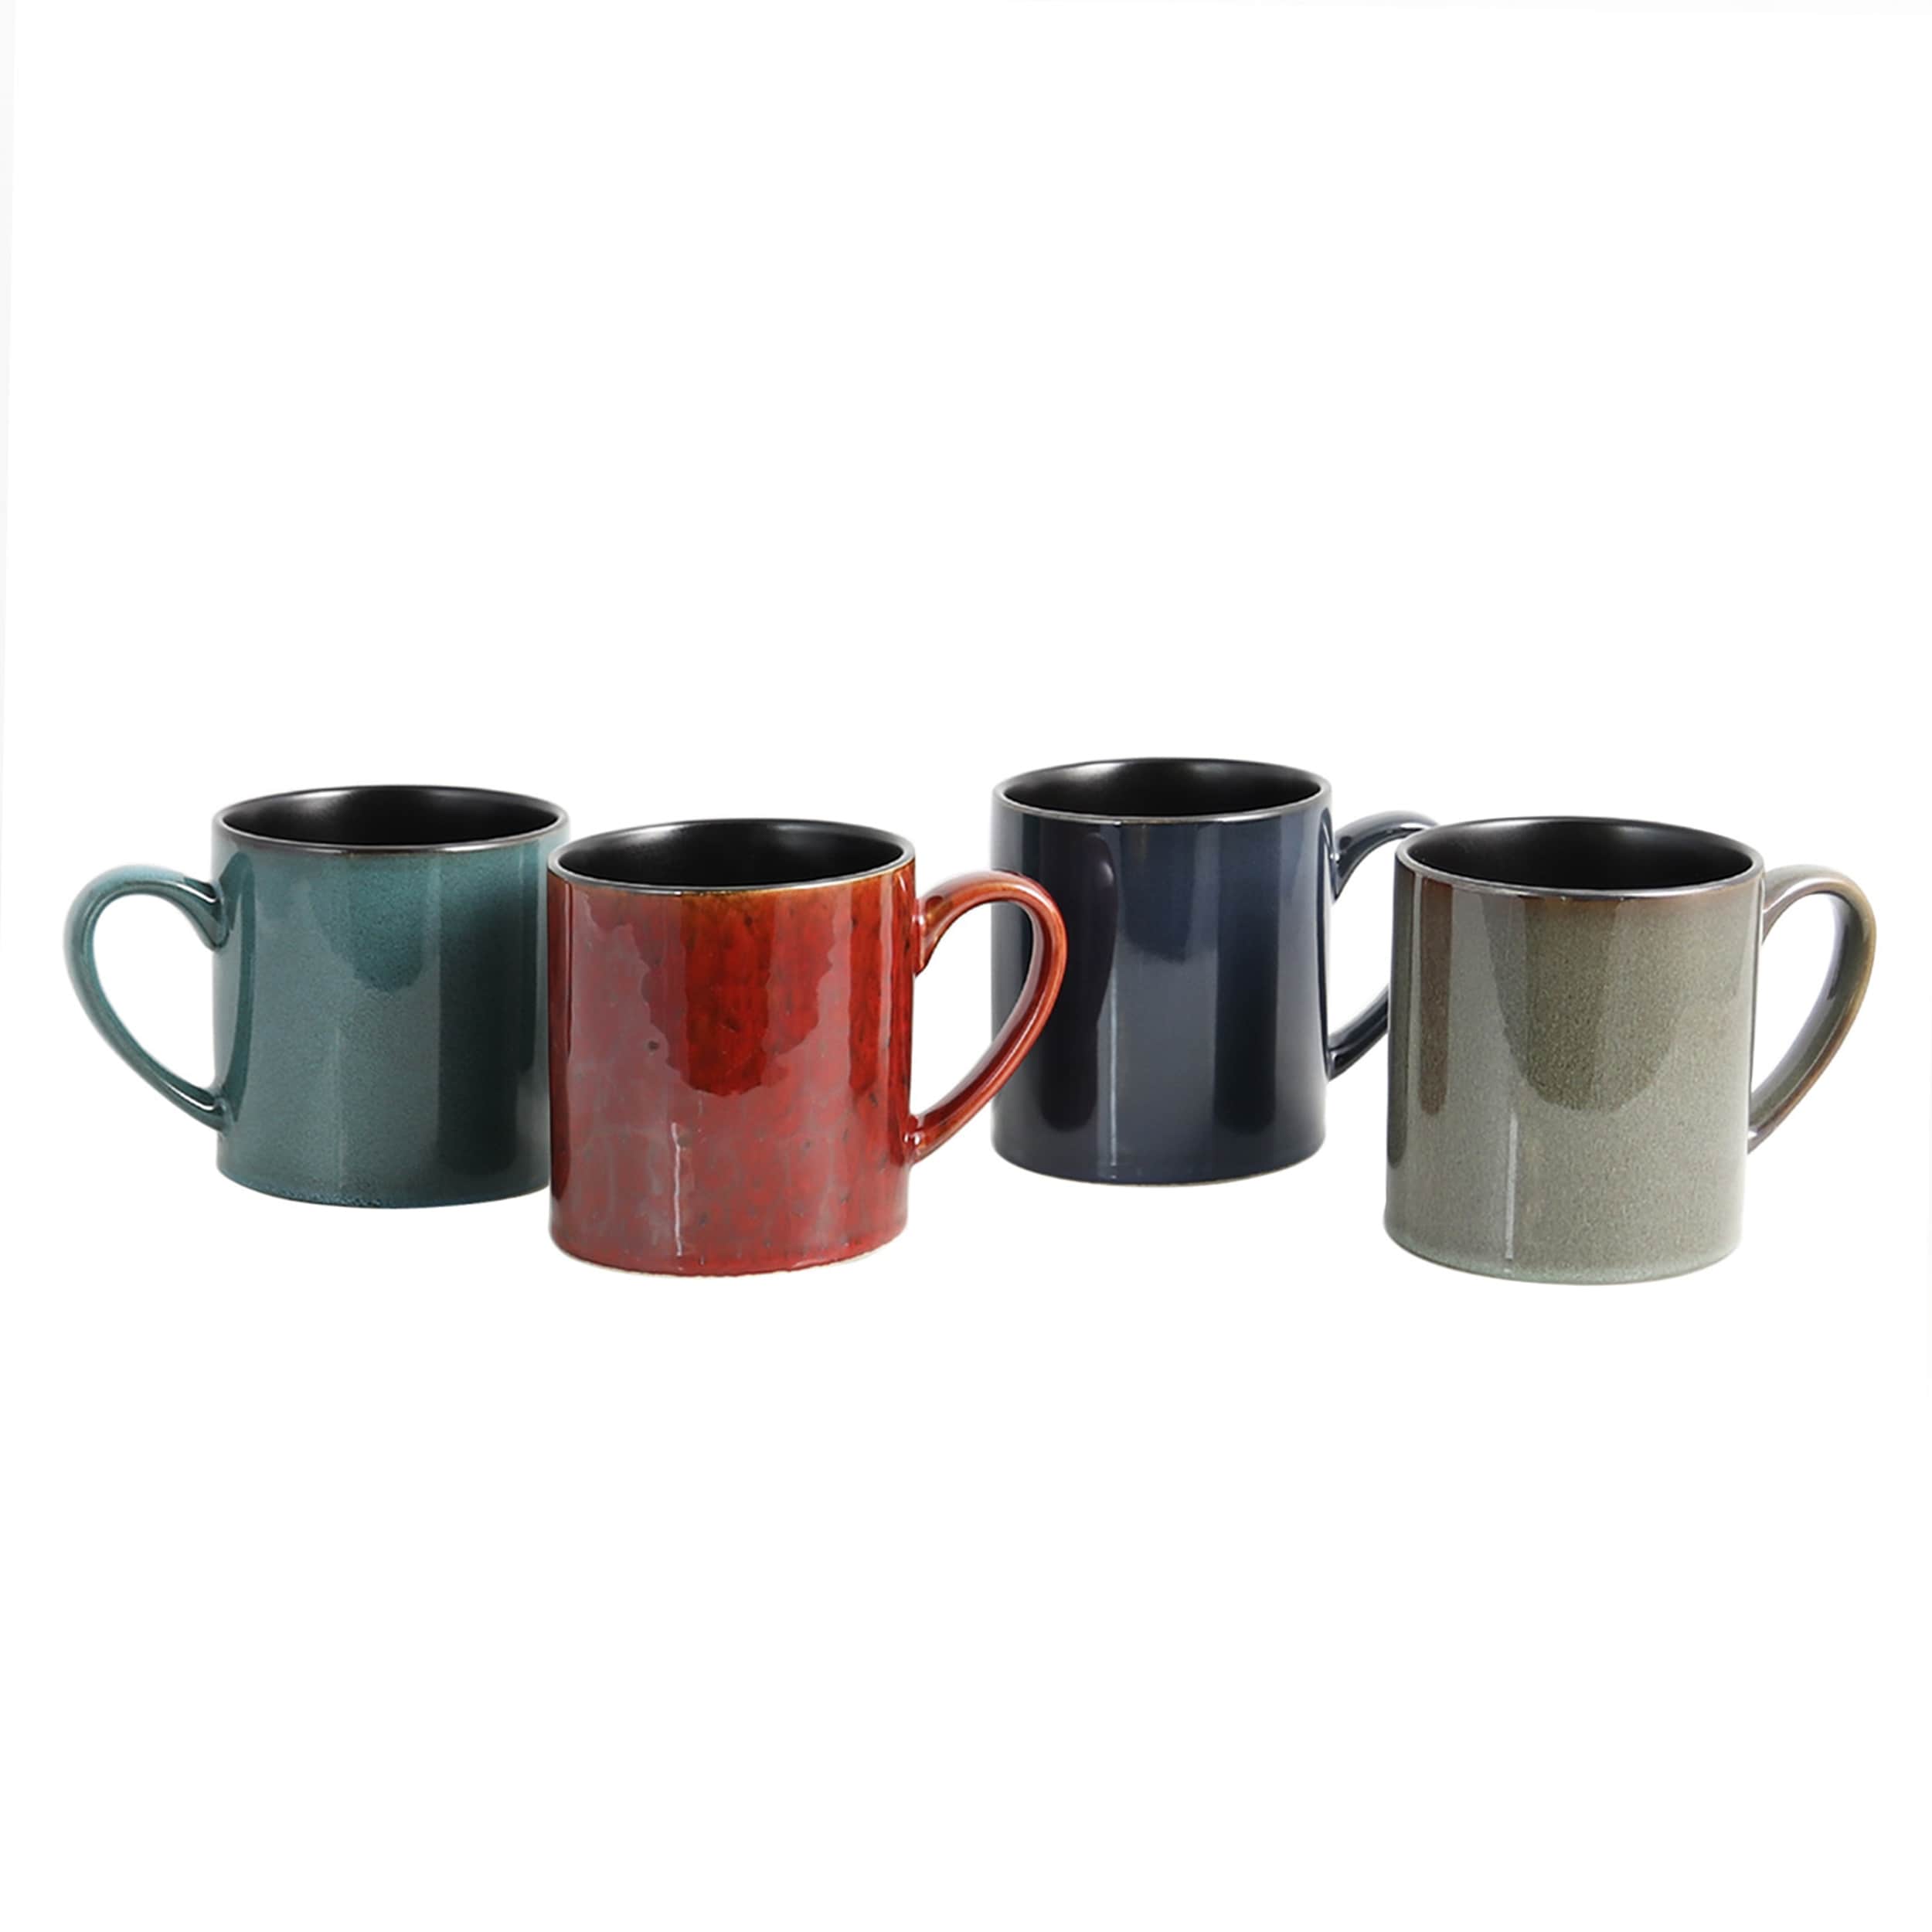 20 Ounce 4 Piece Mug Set in Assorted Colors